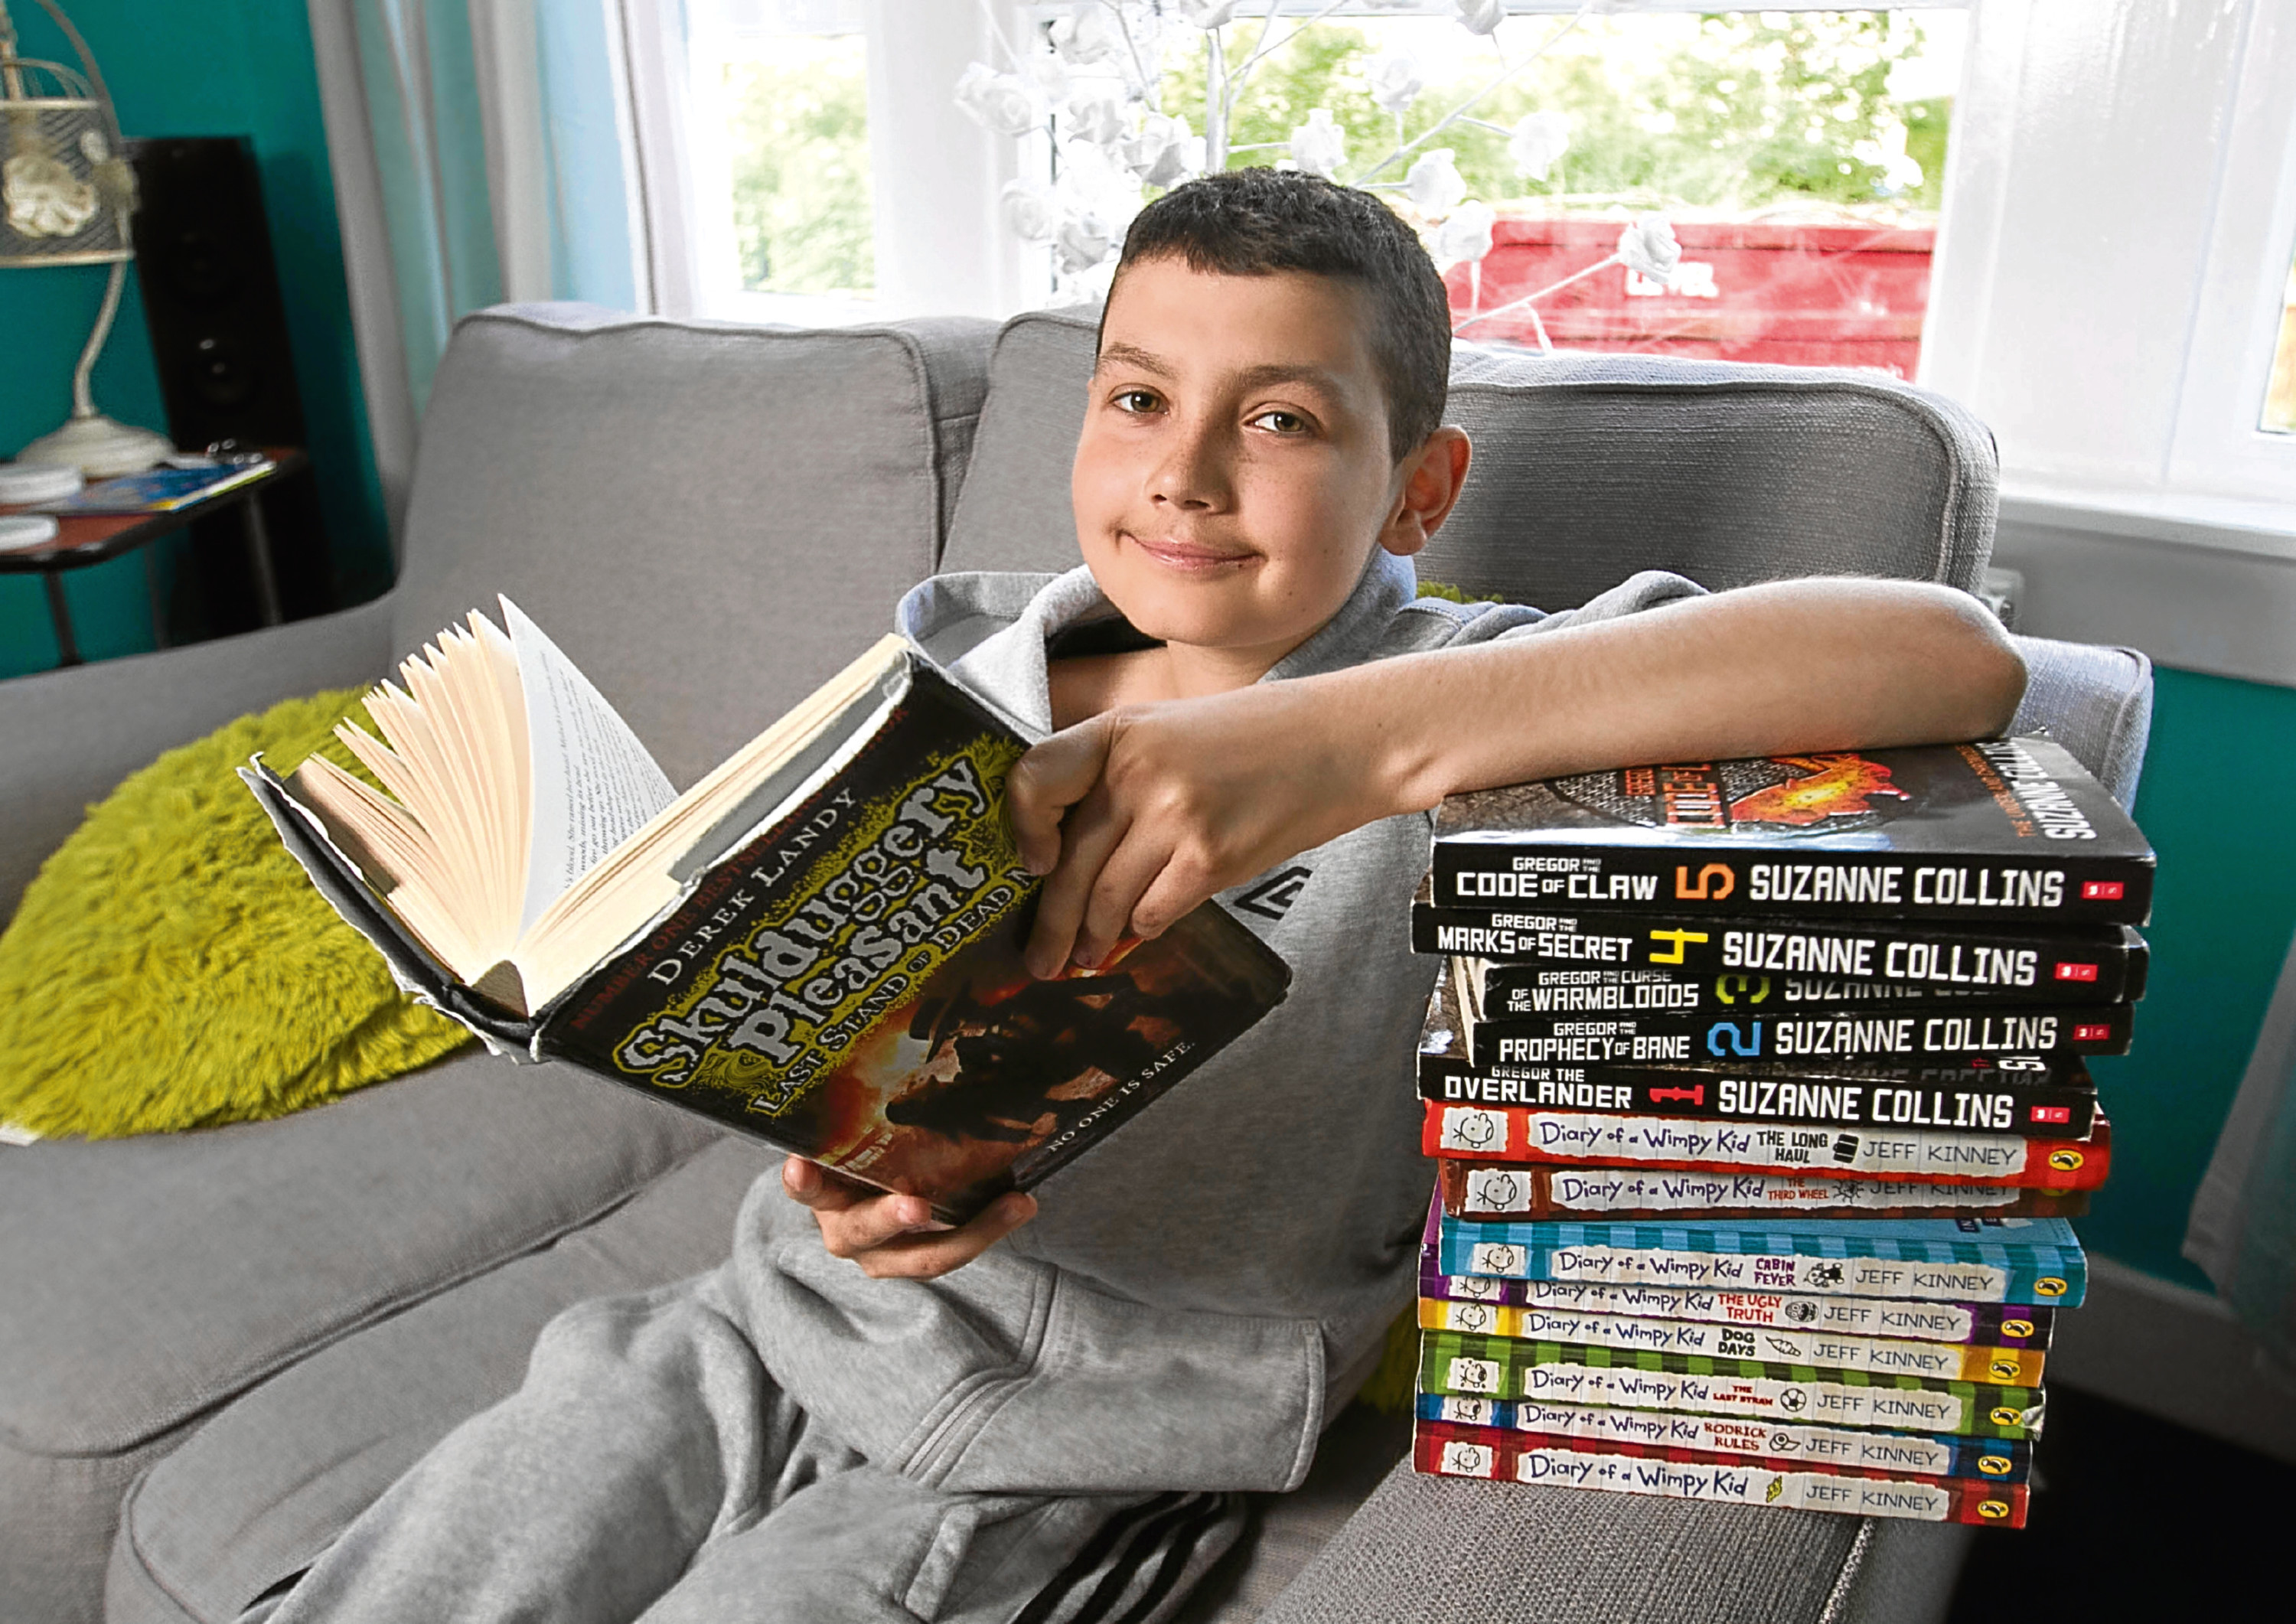 Declan Rennie, 14, spent only three days at St Mungo's High in Falkirk because of a cancer battle - but still came top in English (Sunday Post)